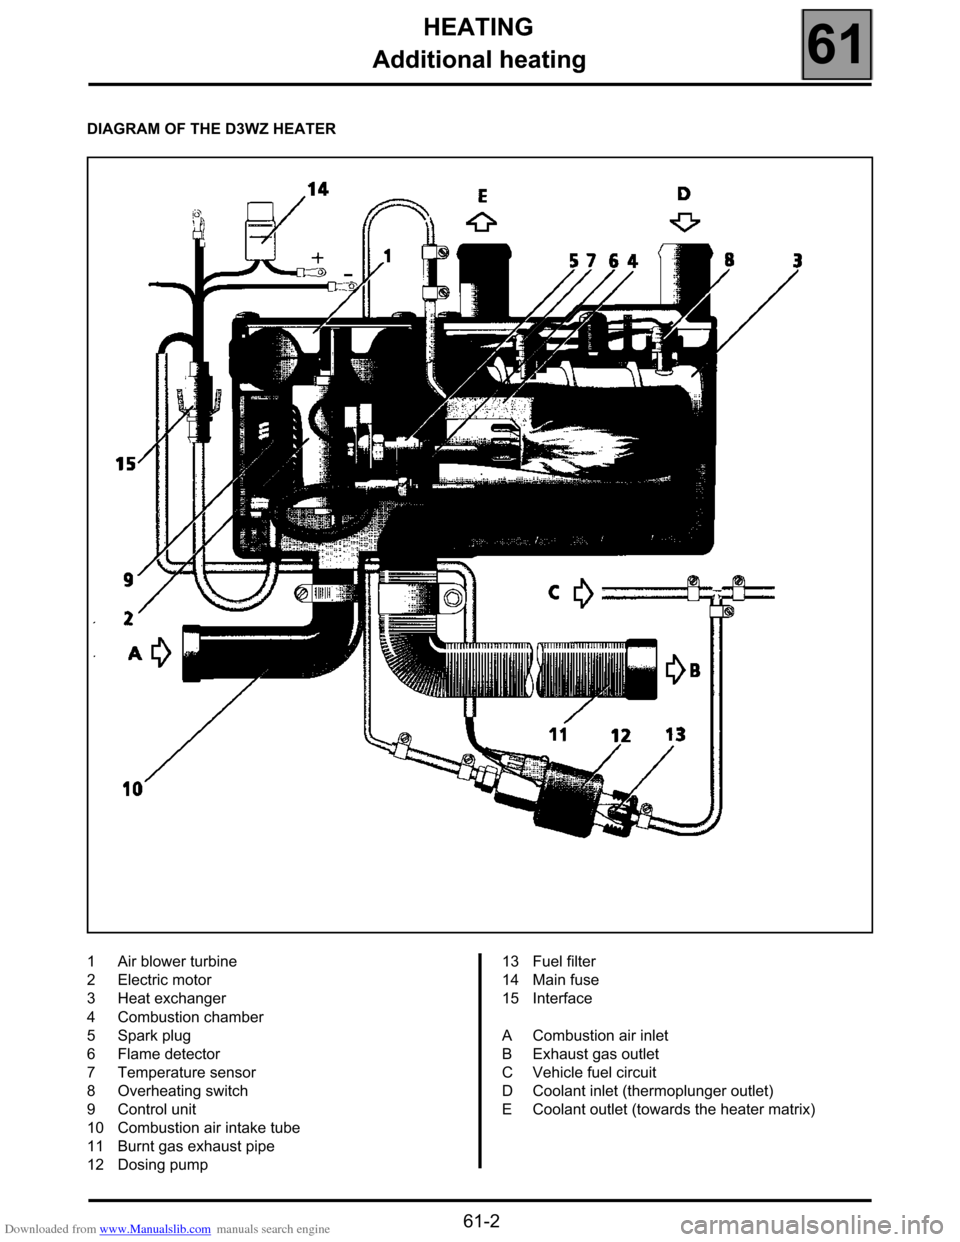 RENAULT ESPACE 2000 J66 / 3.G Technical Note 3426A Service Manual Downloaded from www.Manualslib.com manuals search engine HEATING
Additional heating
61
61-2
DIAGRAM OF THE D3WZ HEATER
1Air blower turbine
2Electric motor
3Heat exchanger
4Combustion chamber
5Spark pl